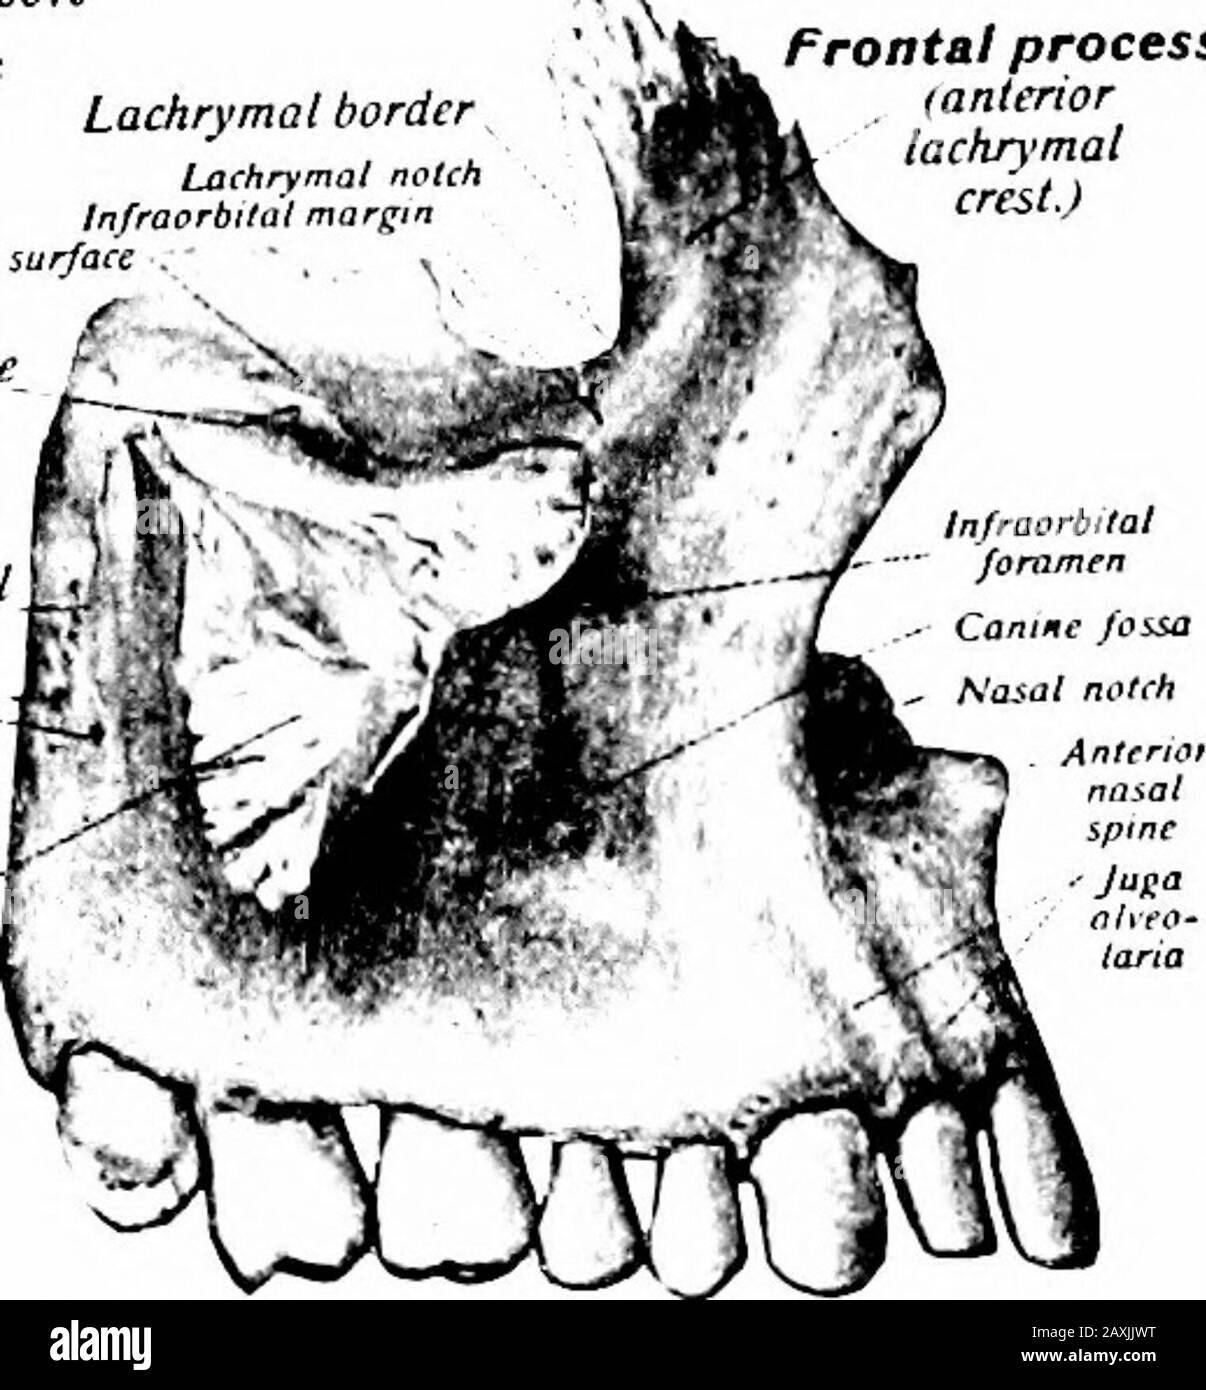 A manual of anatomy . Incisive canal Maxillary sinus Pterygopalatine groovePa/ate process Lachrymal borderLachrymal notch Tuberosity orbital surfc of maxttlaInfraorbital groove  infratemporalsurfaceAlveolar foramina -•- Zygomatic process Frontal process (anterior lachrymal crest.). Fig. 38.—The right maxilla seen from themedial surface. {Sobotla and McMurrich.) Fig. 39.—The right maxilla seen fromthe lateral surface. {^Sobotta and Mc-Murrich.) that extends beyond the last molar tooth is called the maxillarytuberosity {tuber maxillare). The nasalj or medial surface (fades nasalis) forms a part Stock Photo